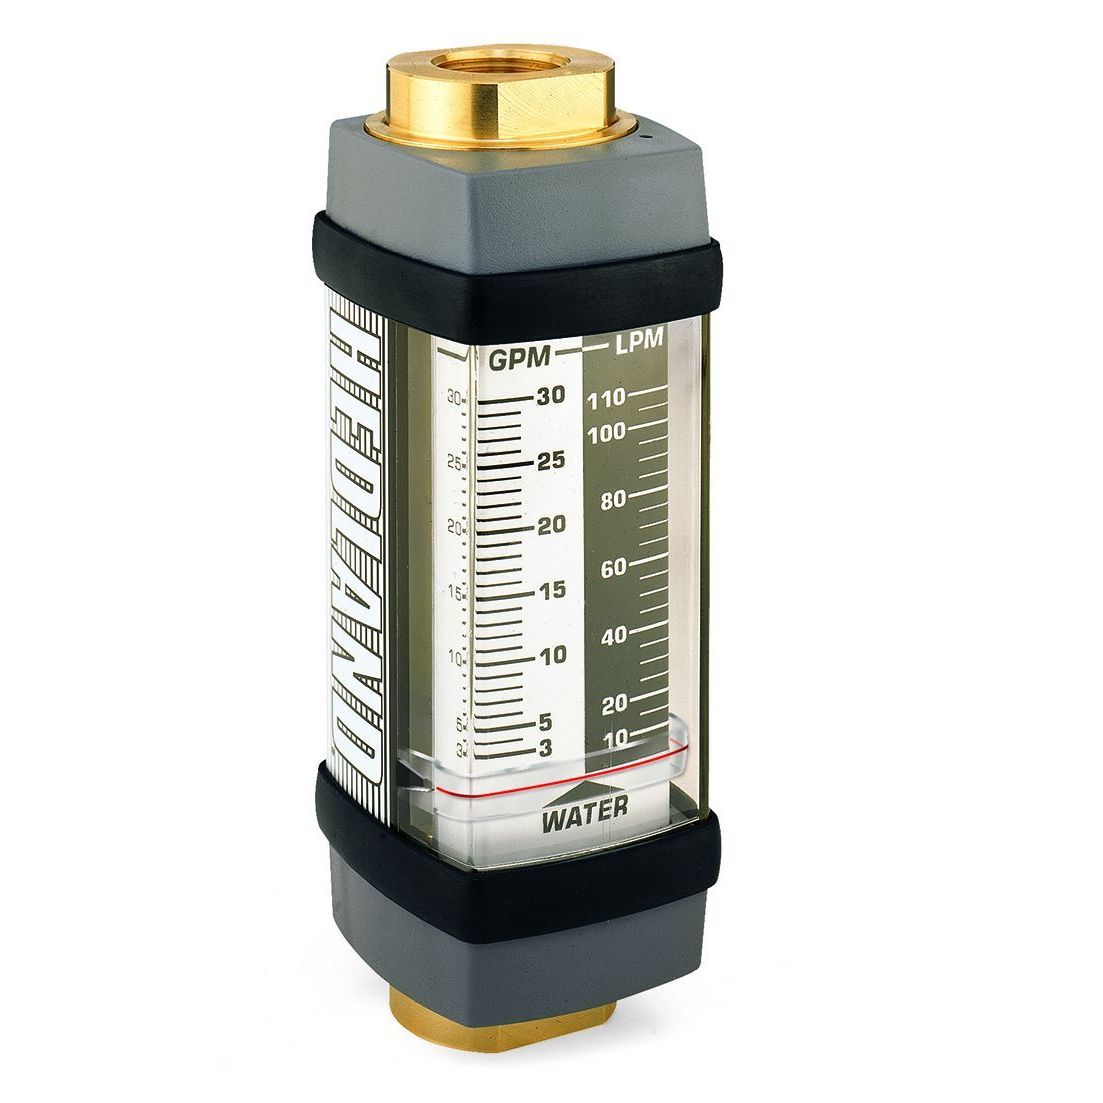 H705B-005 : Hedland 3500psi Brass Flow Meter for Water, 3/4 NPT, 0.5 to 5.0 GPM